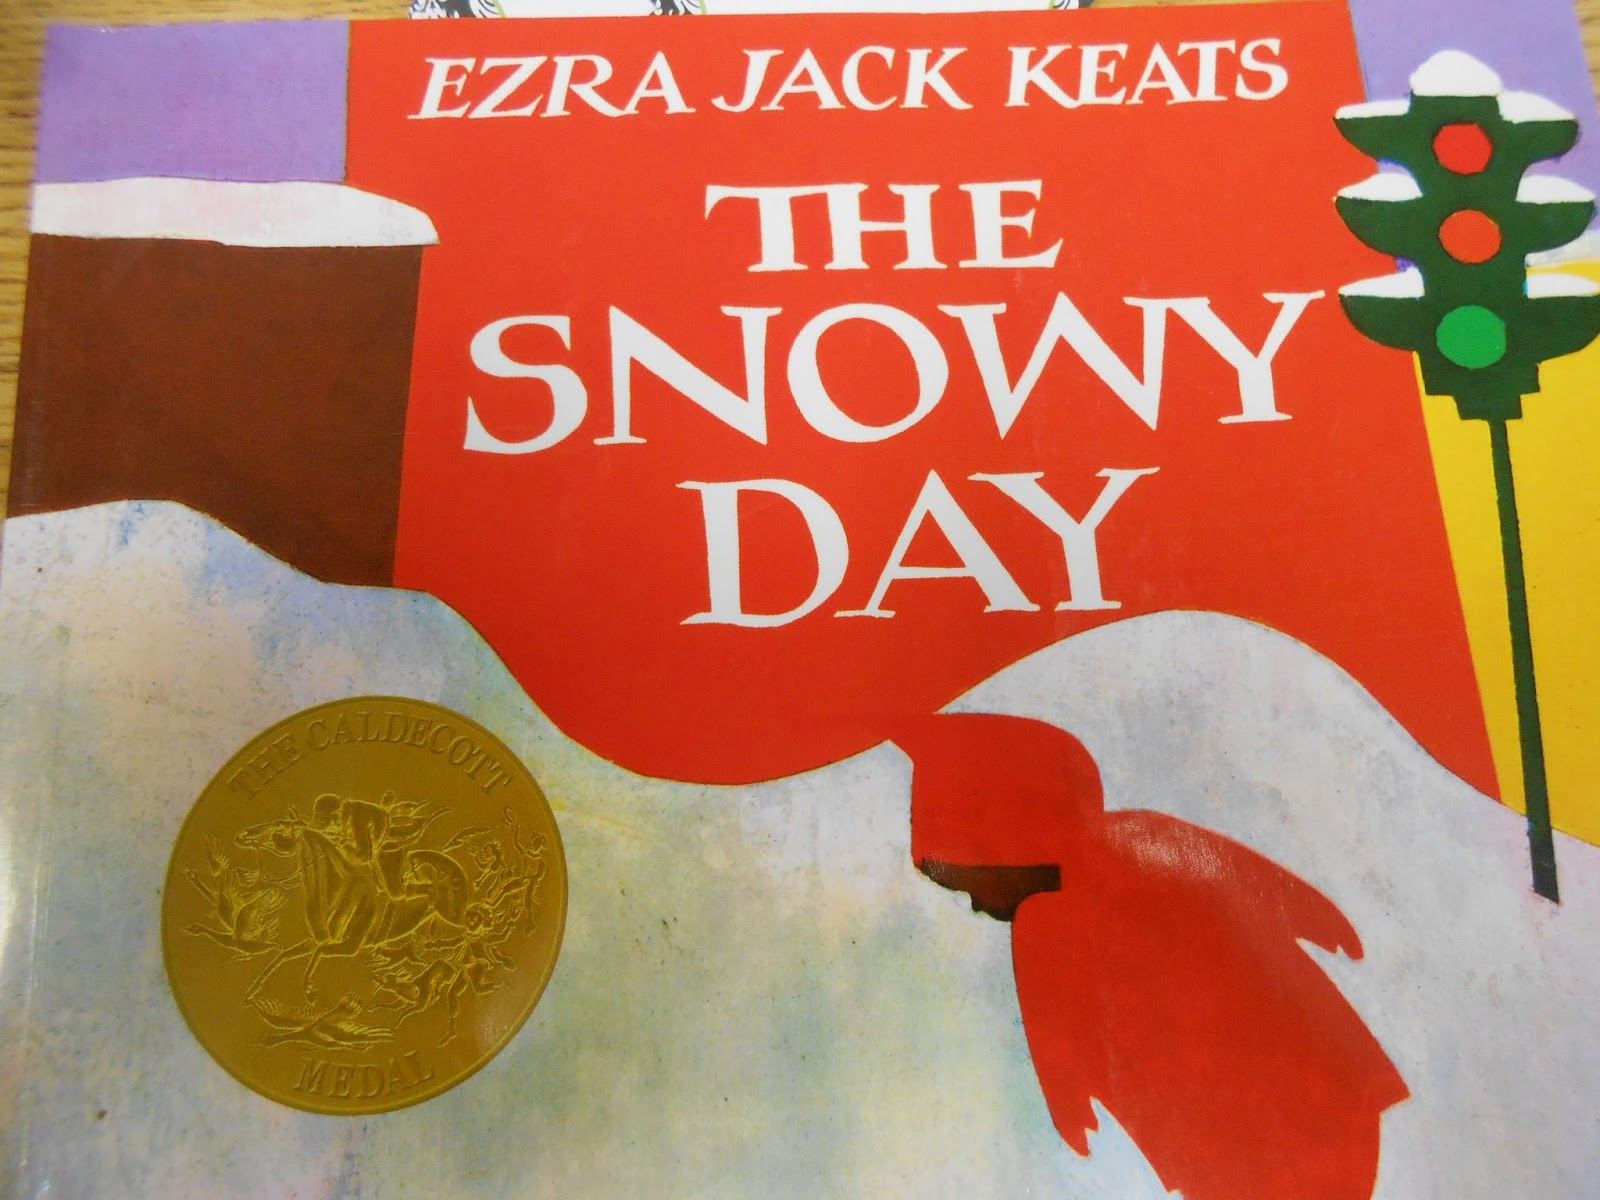 Our Pre-K Room: The Snowy Day